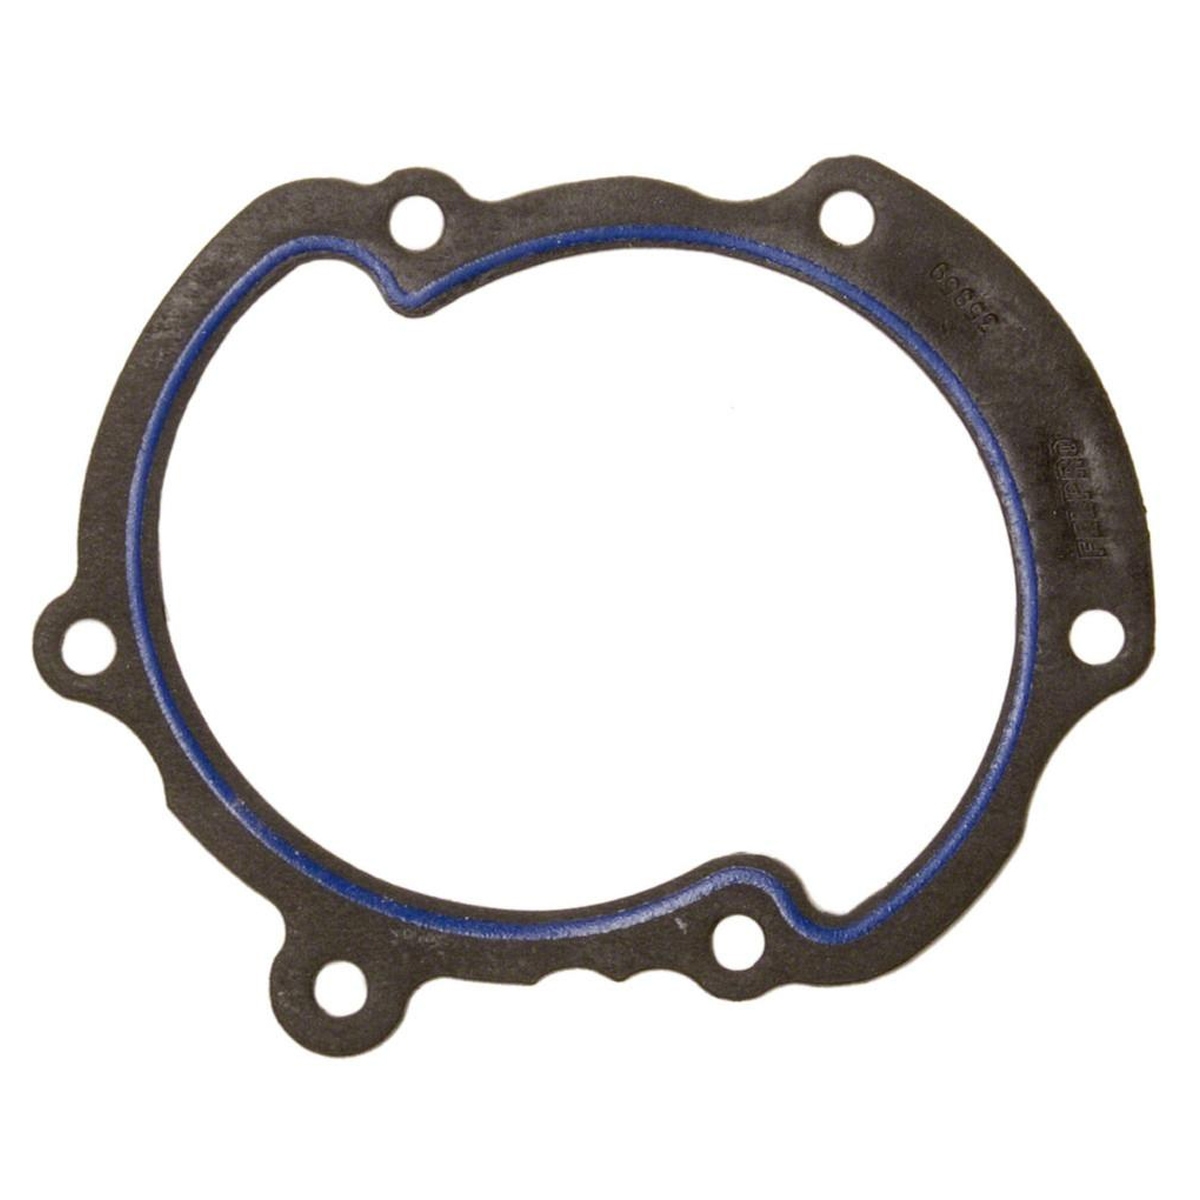 FORD S-MAX Water Pump Gasket